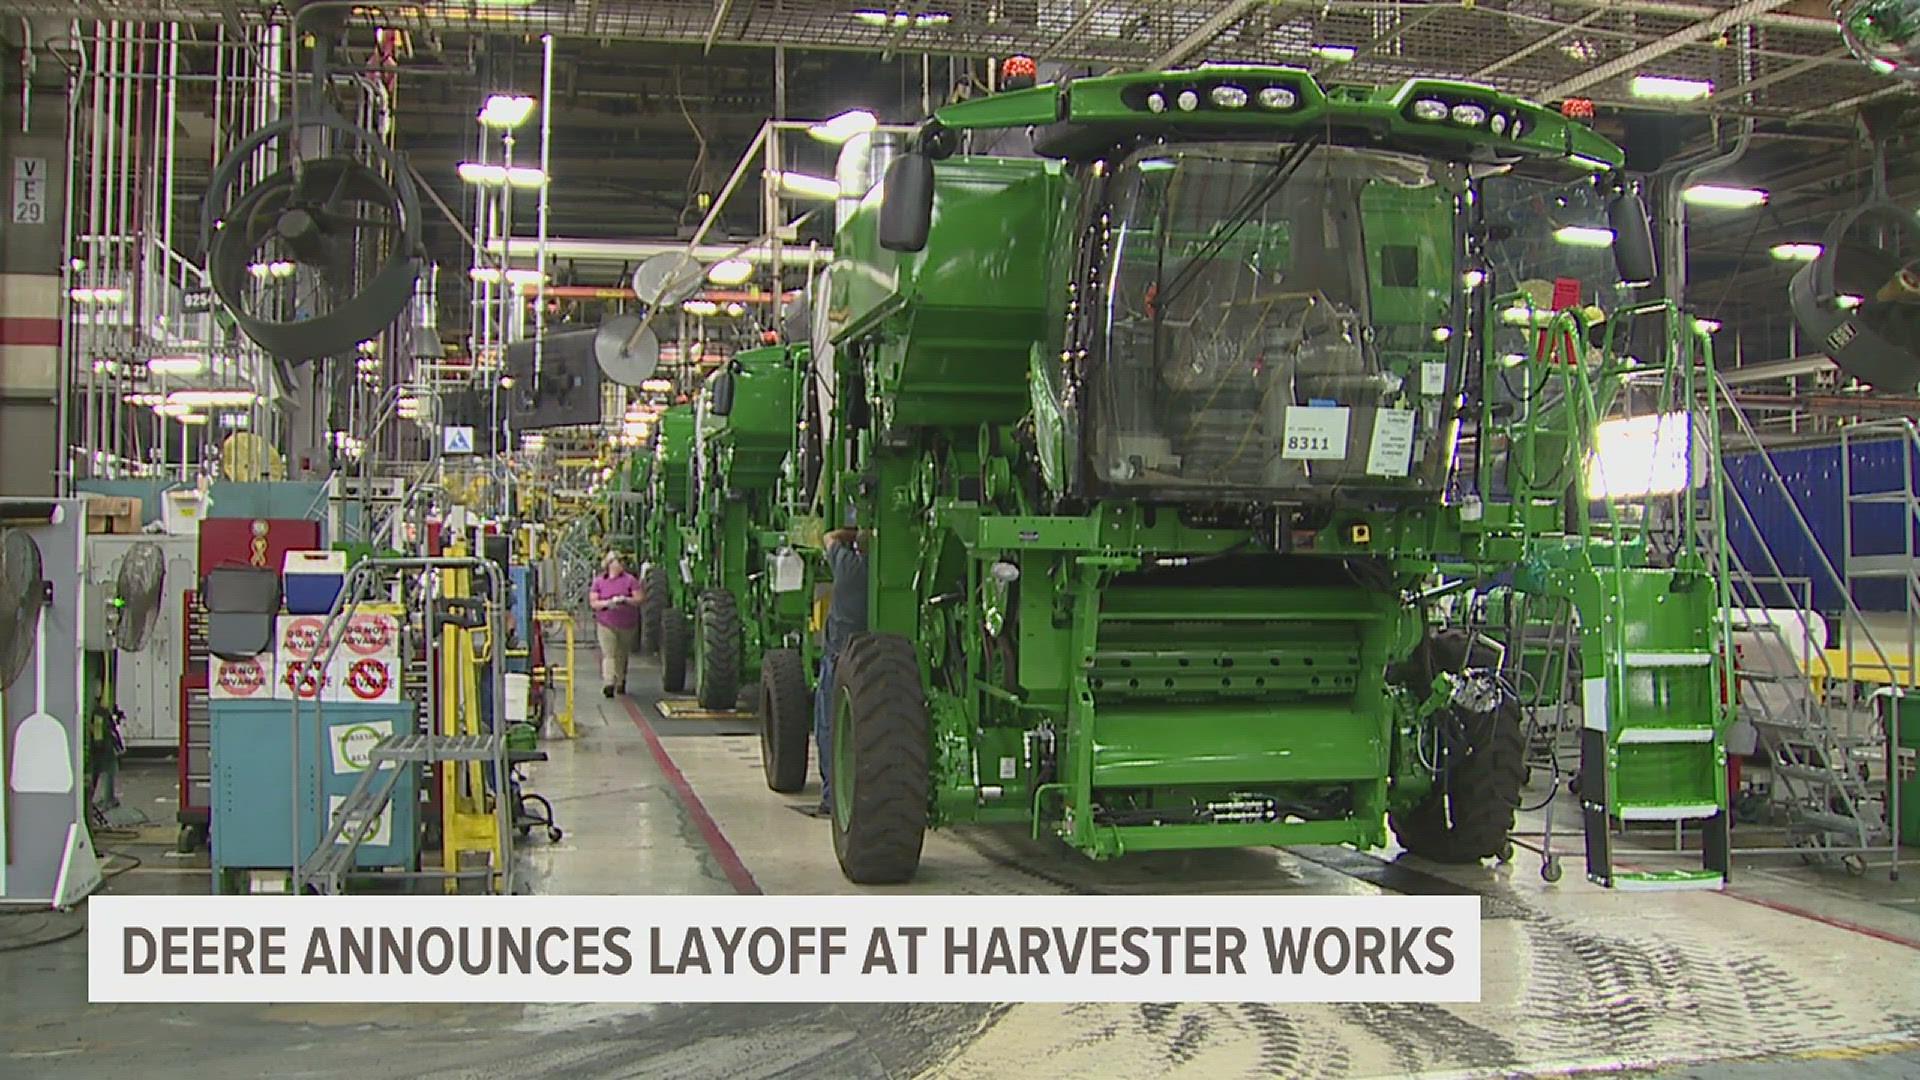 John Deere is laying off 225 workers from their East Moline facility, and road closures are expected for Bettendorf Homecoming parade.